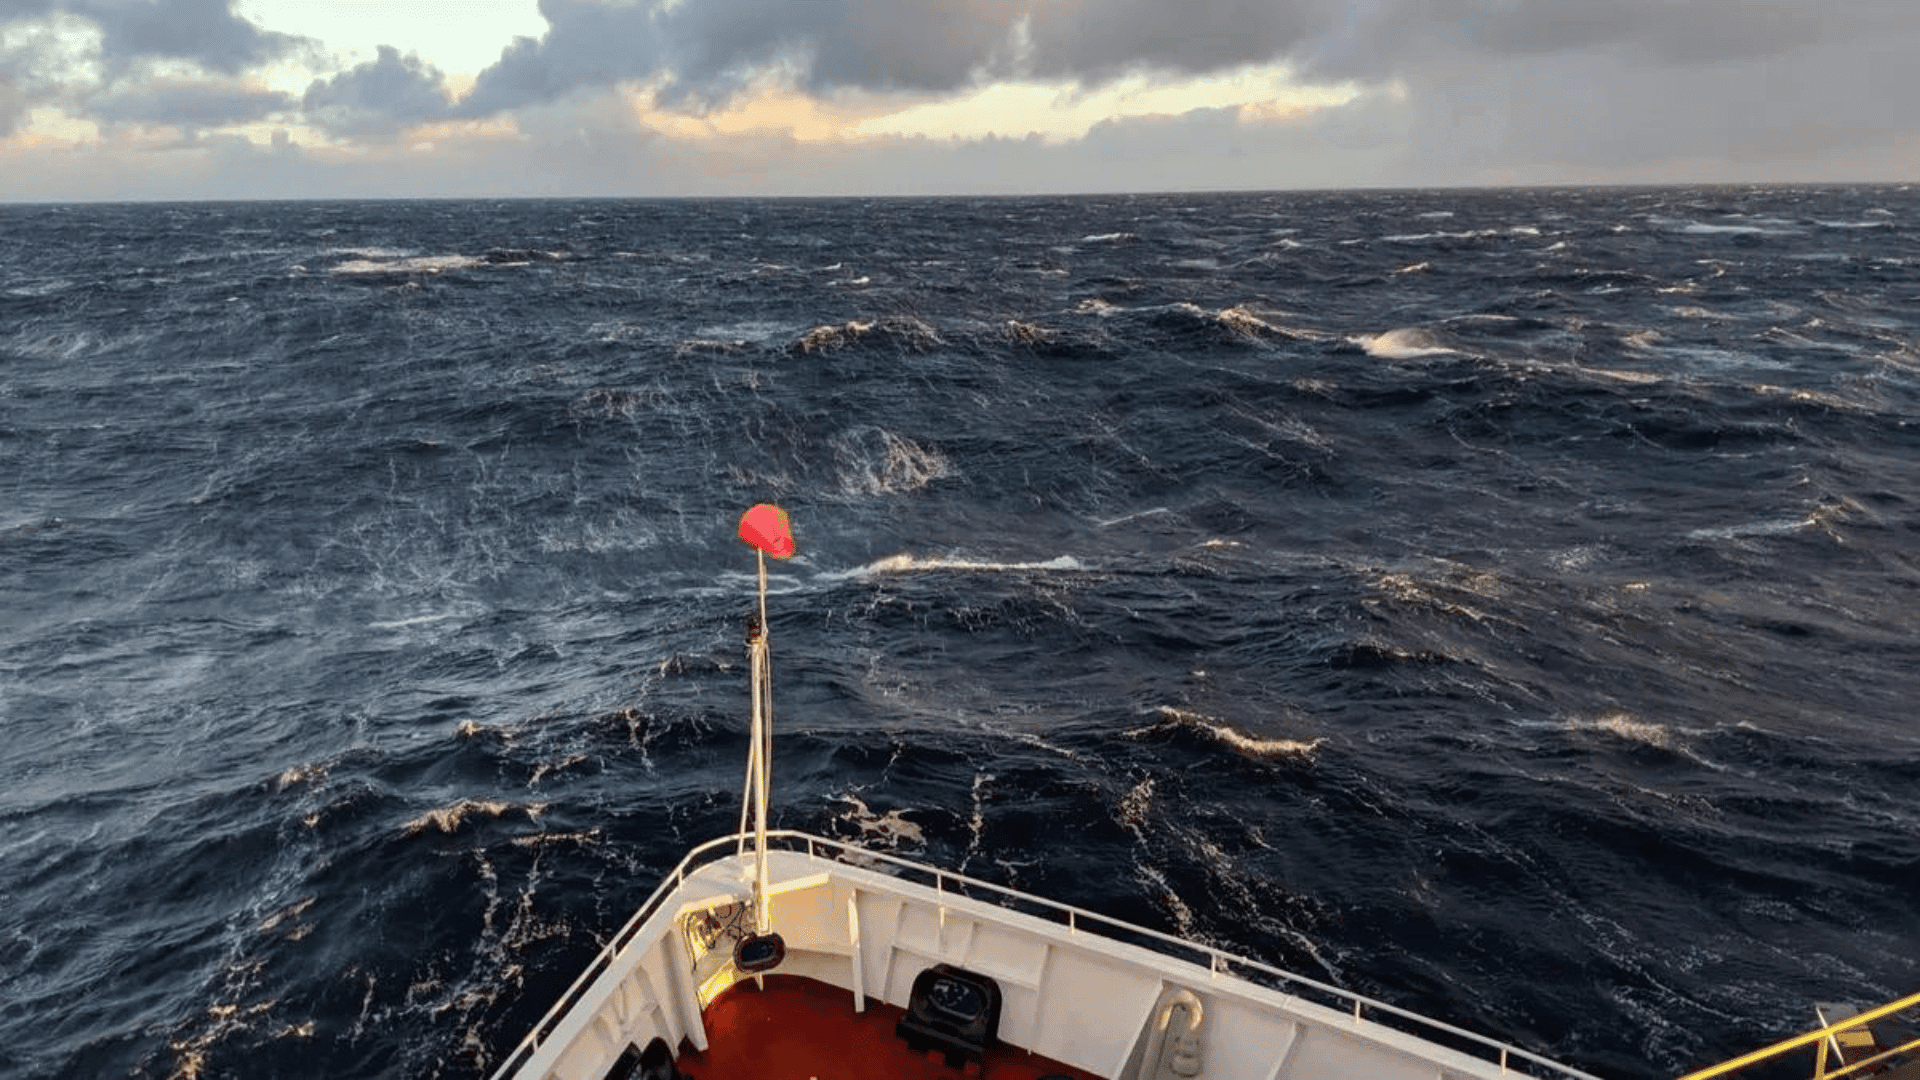 The research vessel, JOIDES Resolution, heads into a rare calm day in the South Pacific region of the Antarctic Circumpolar Current. Image credit: Gisela Winckler